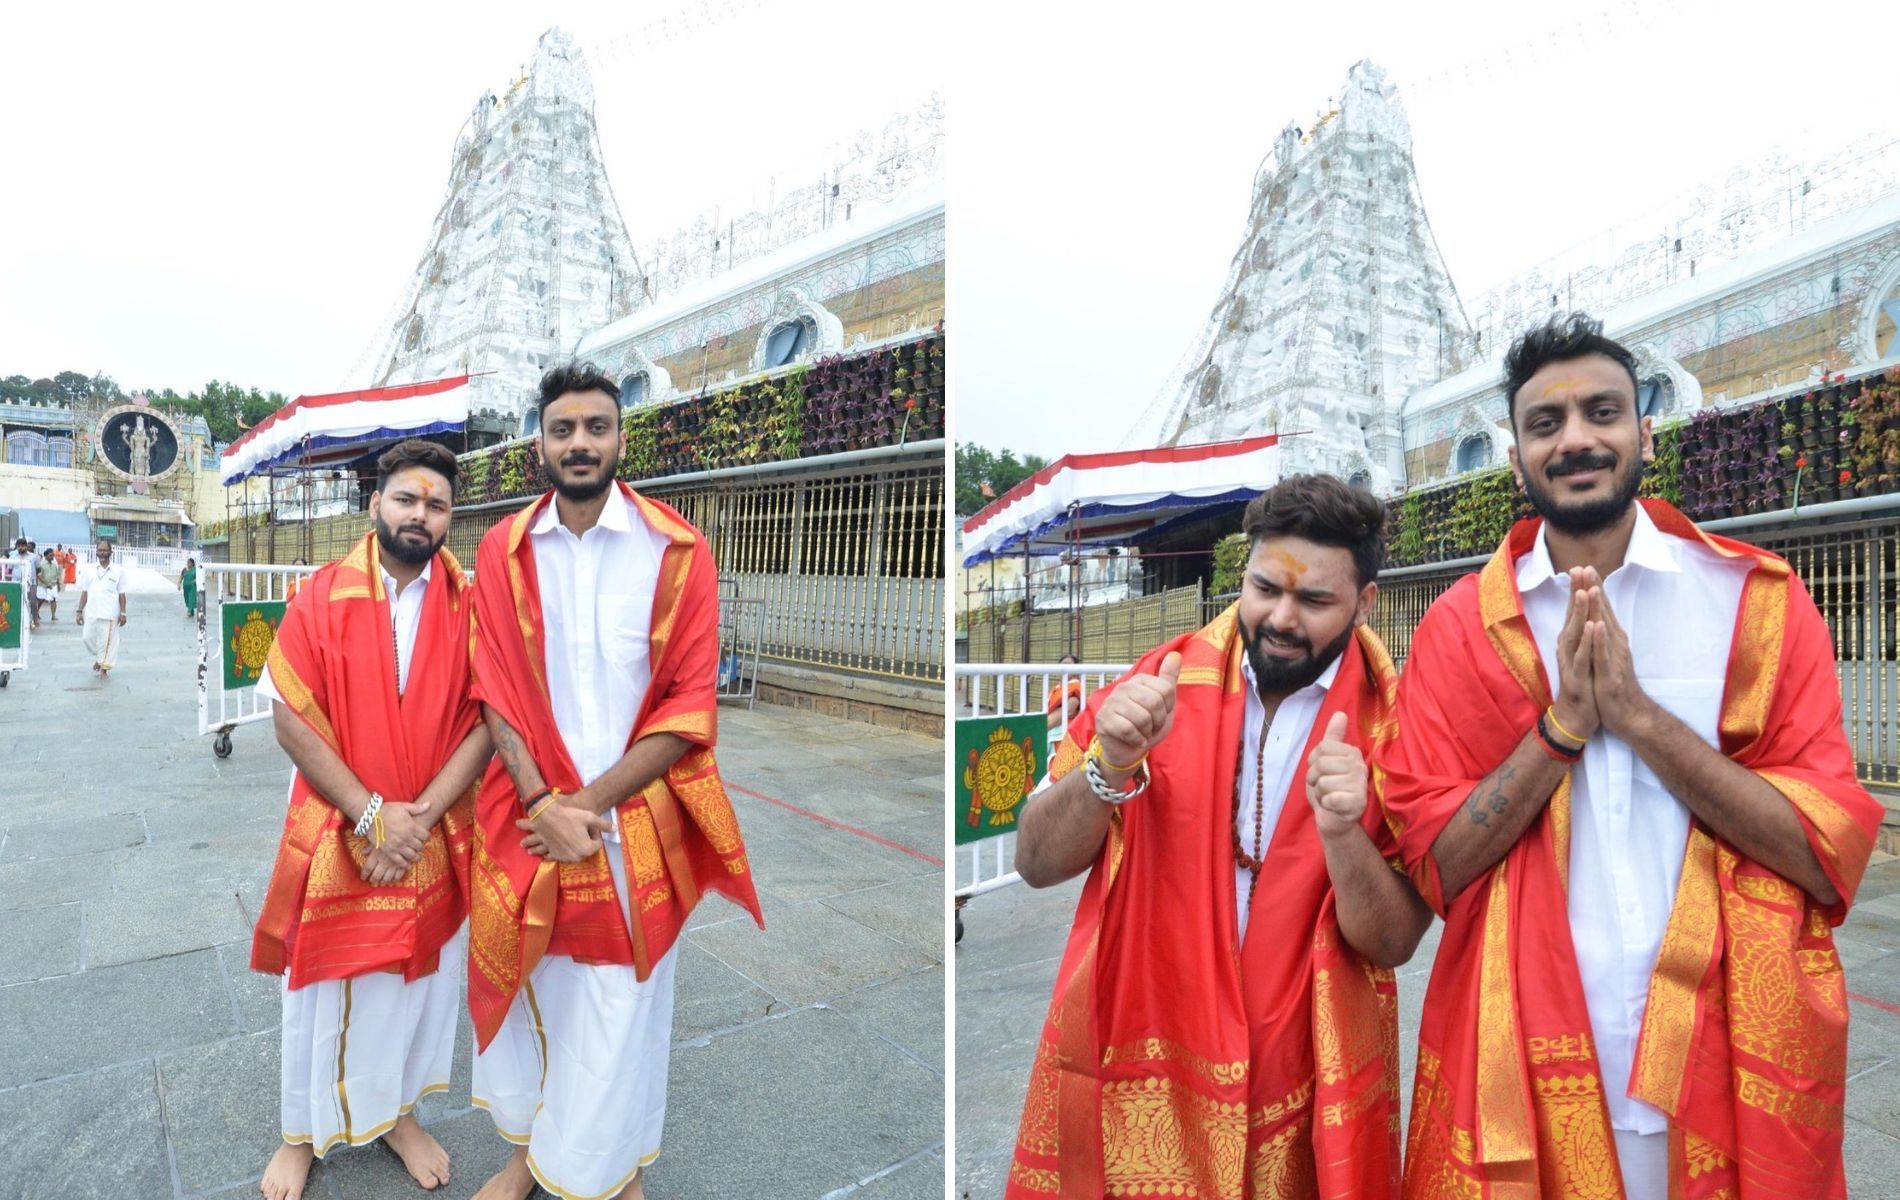 Rishabh Pant and Axar Patel paid a visit to the Balaji Temple. (Pics: Instagram)